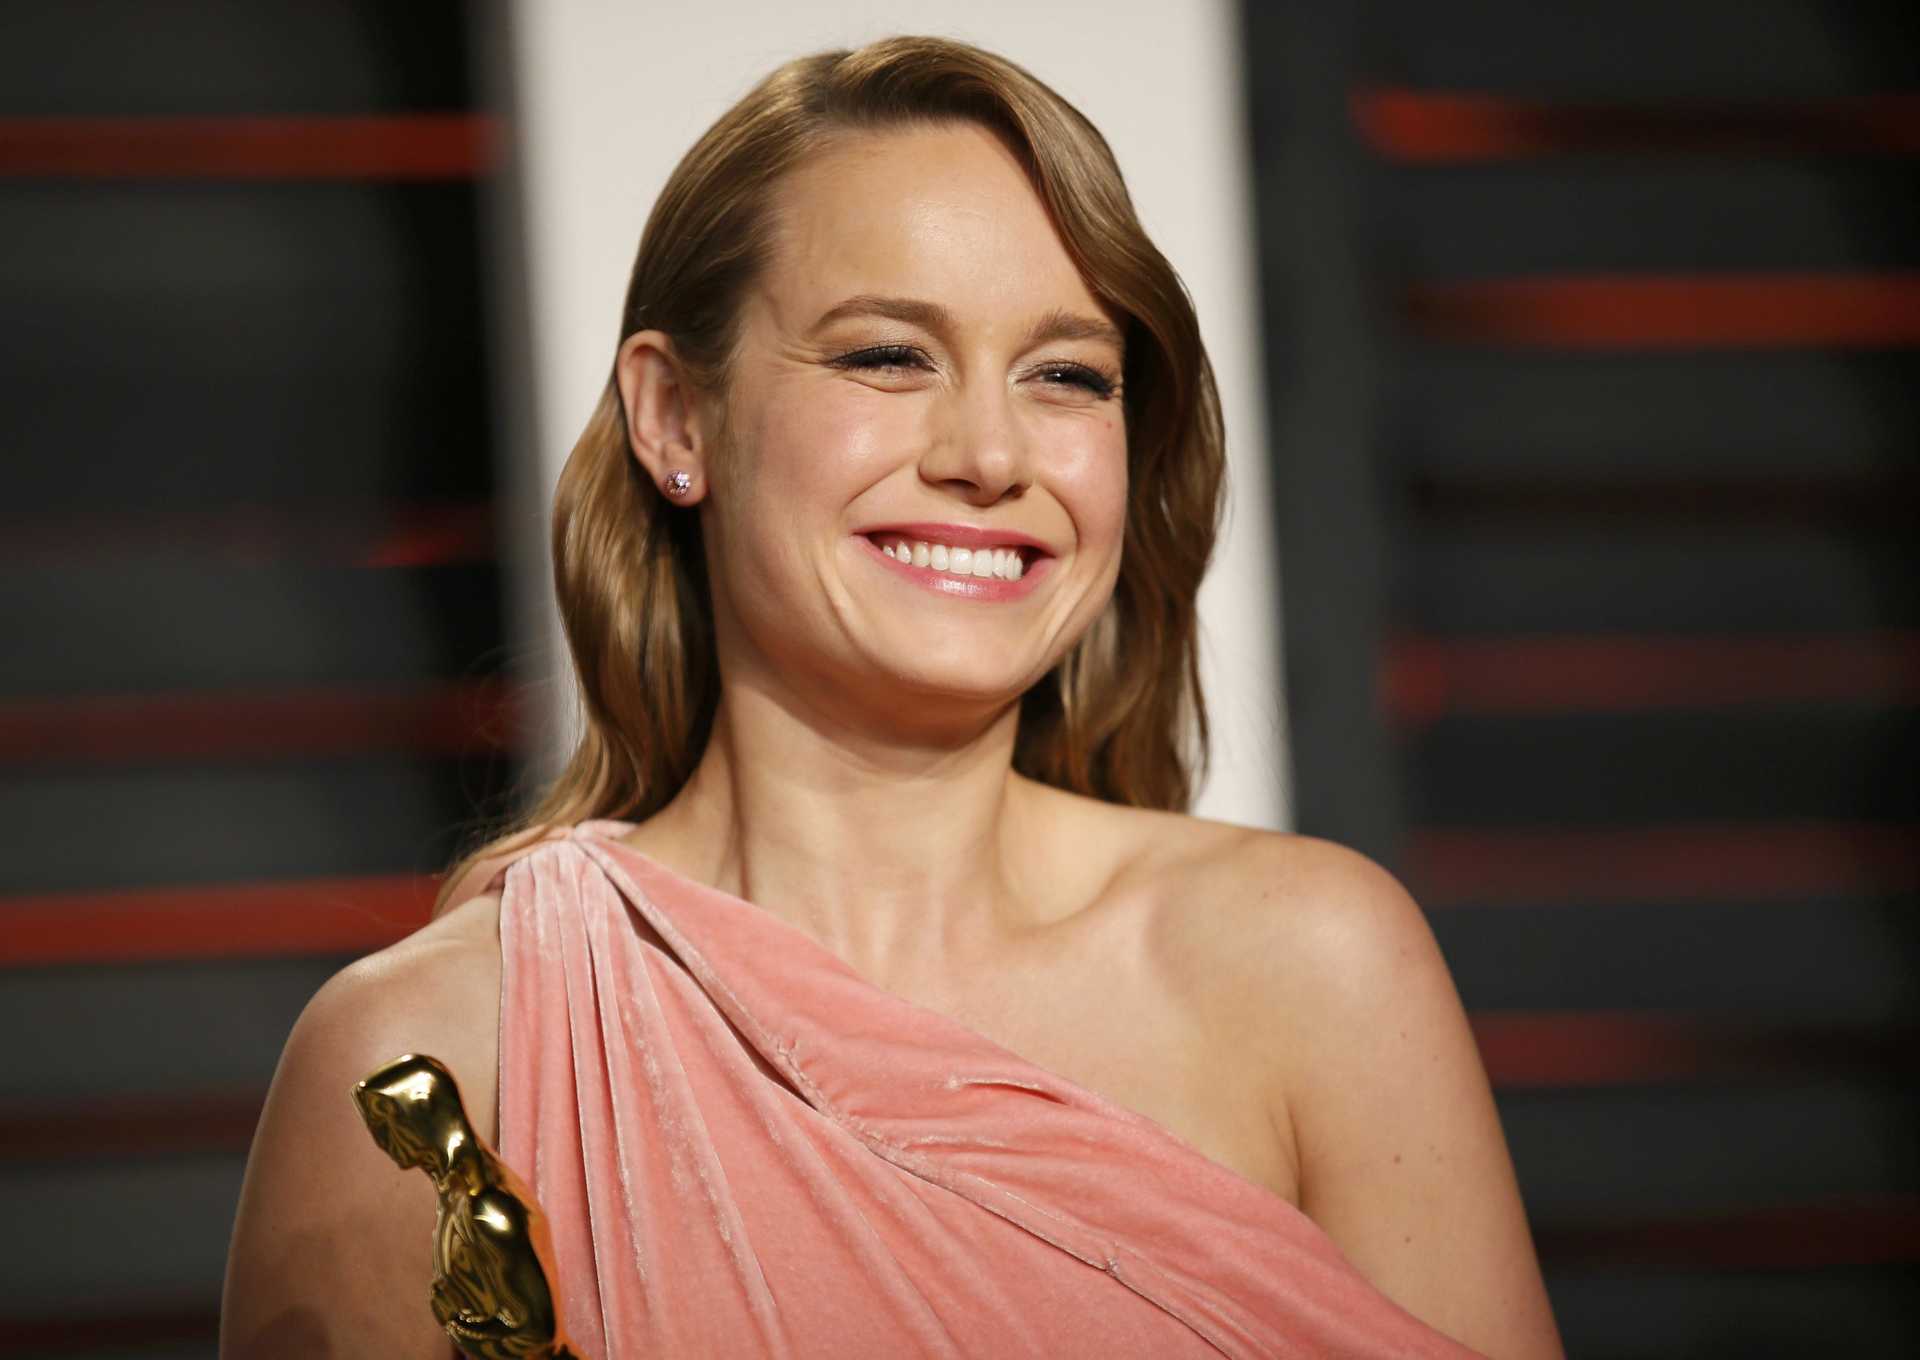 Brie Larson holds her award for Best Actress in a Leading Role during the Vanity Fair Oscar Party in Beverly Hills